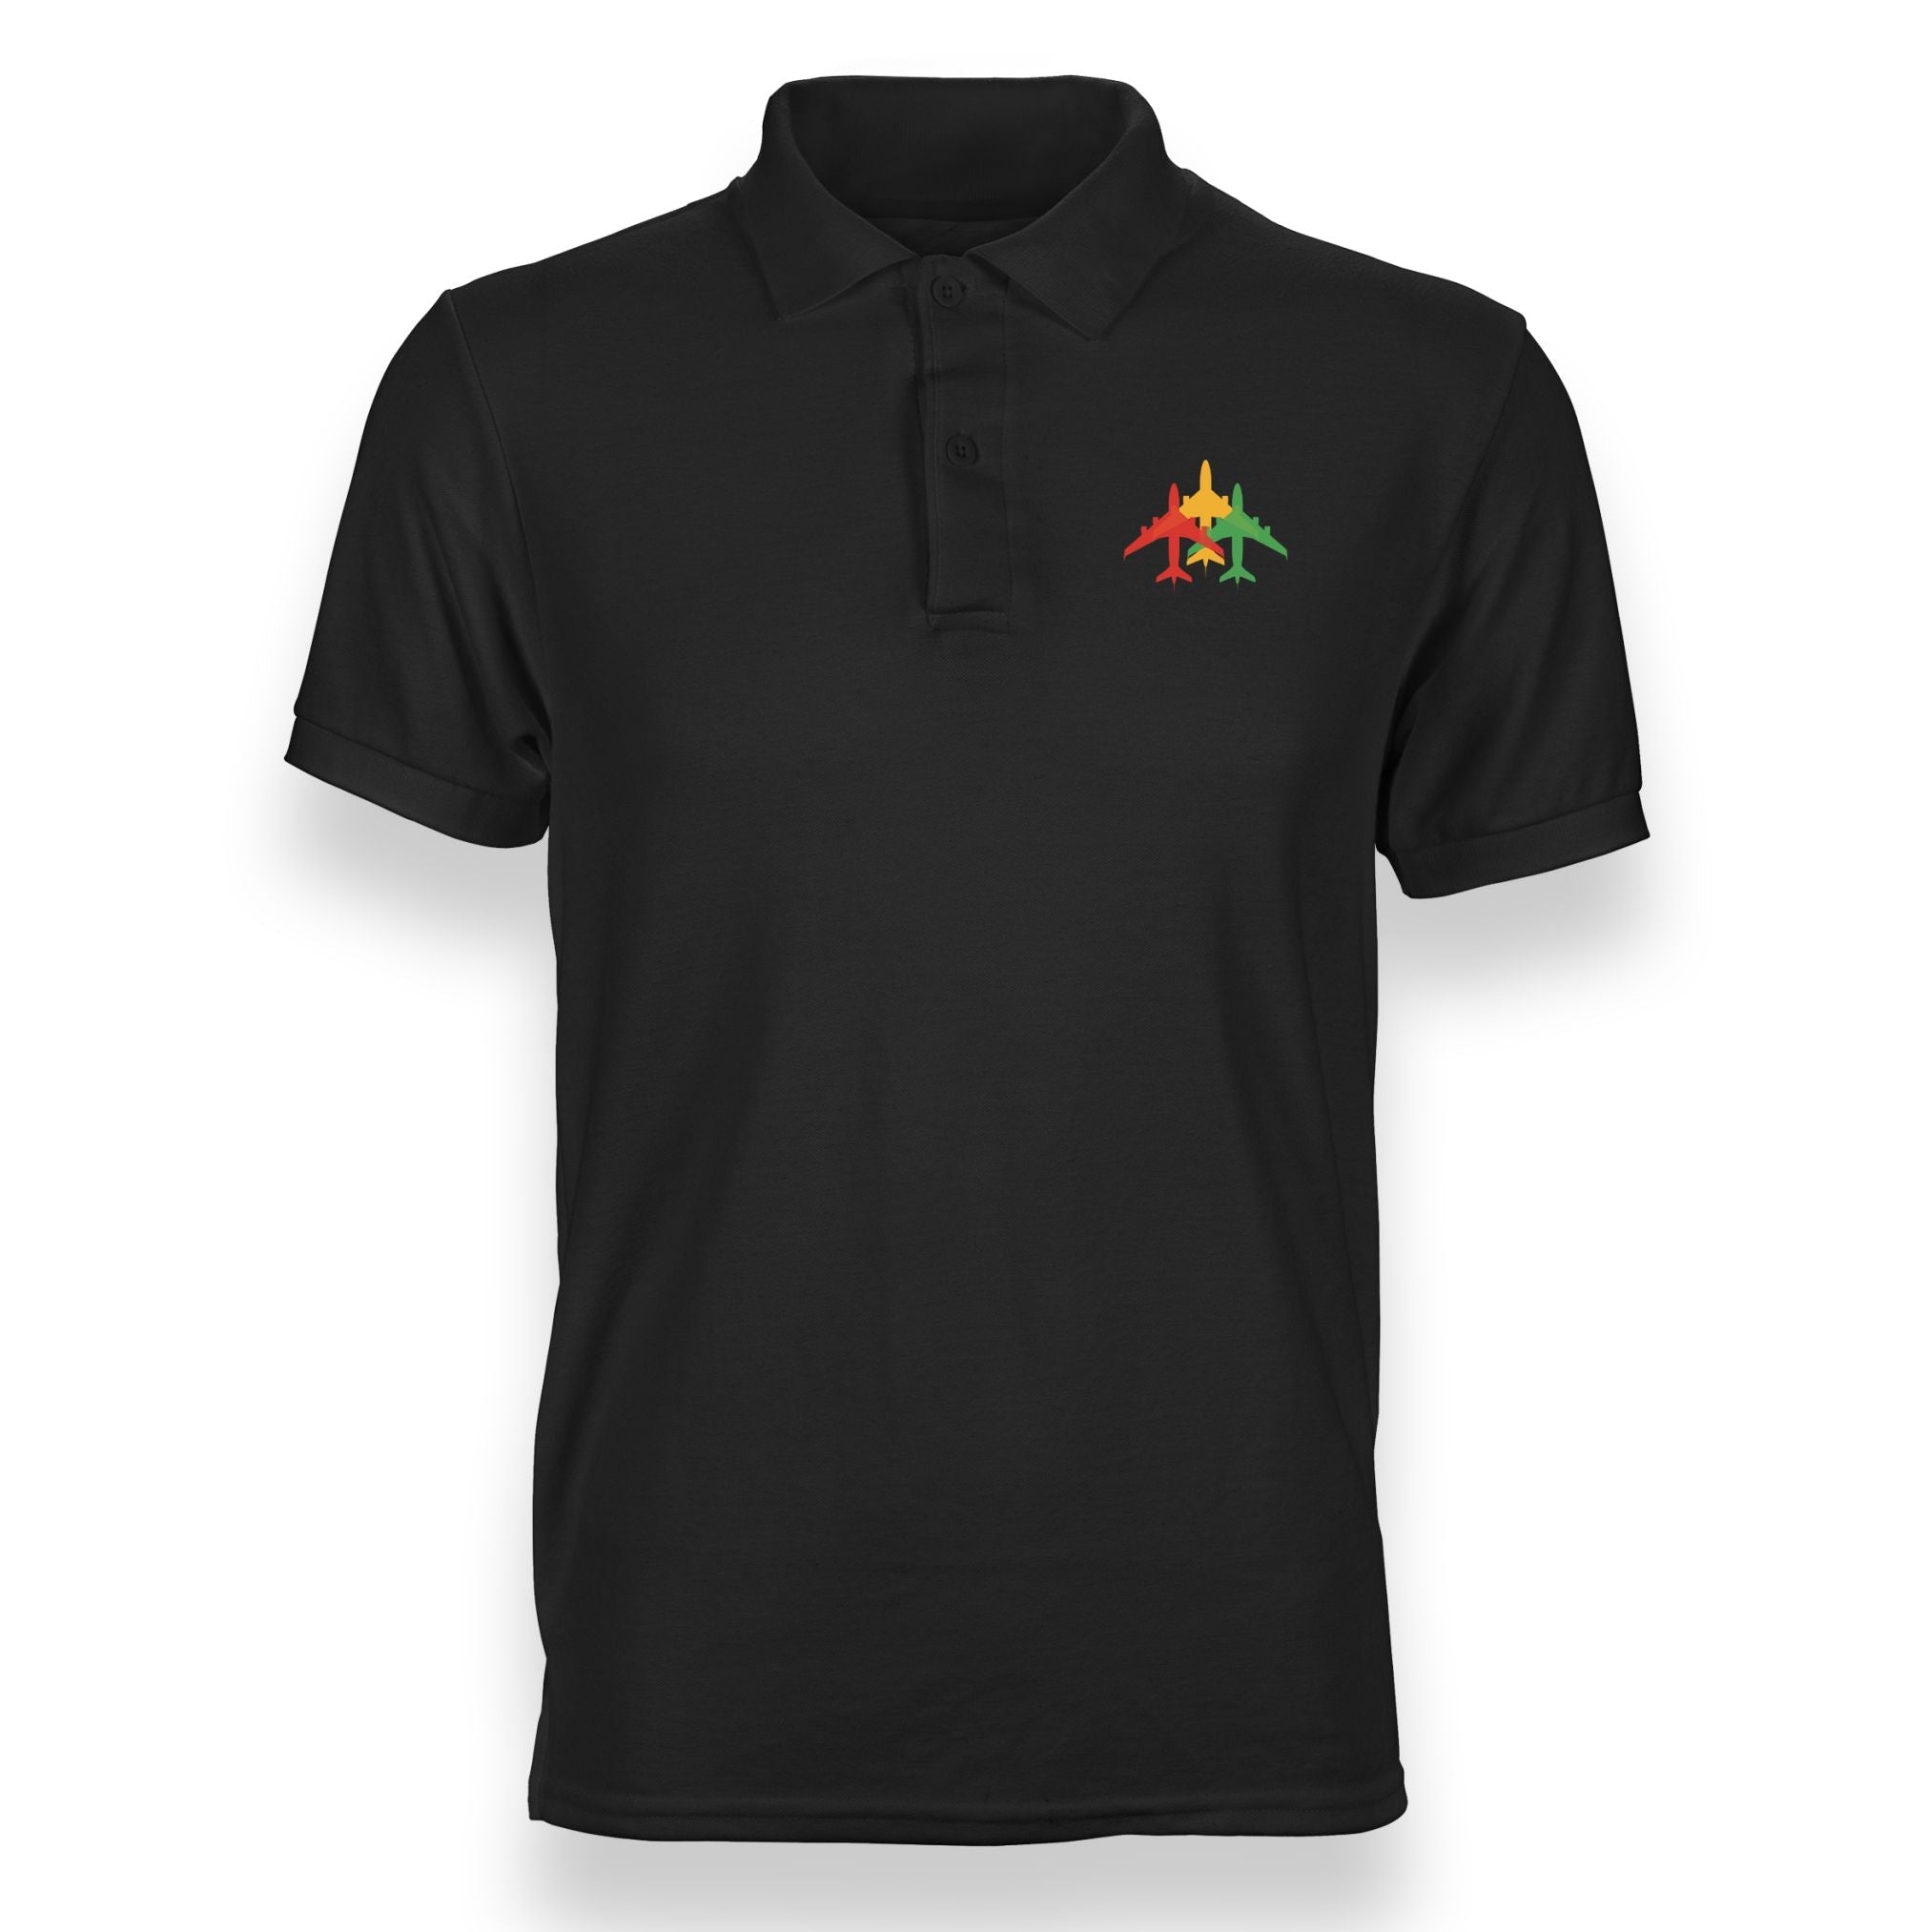 Colourful 3 Airplanes Designed "WOMEN" Polo T-Shirts